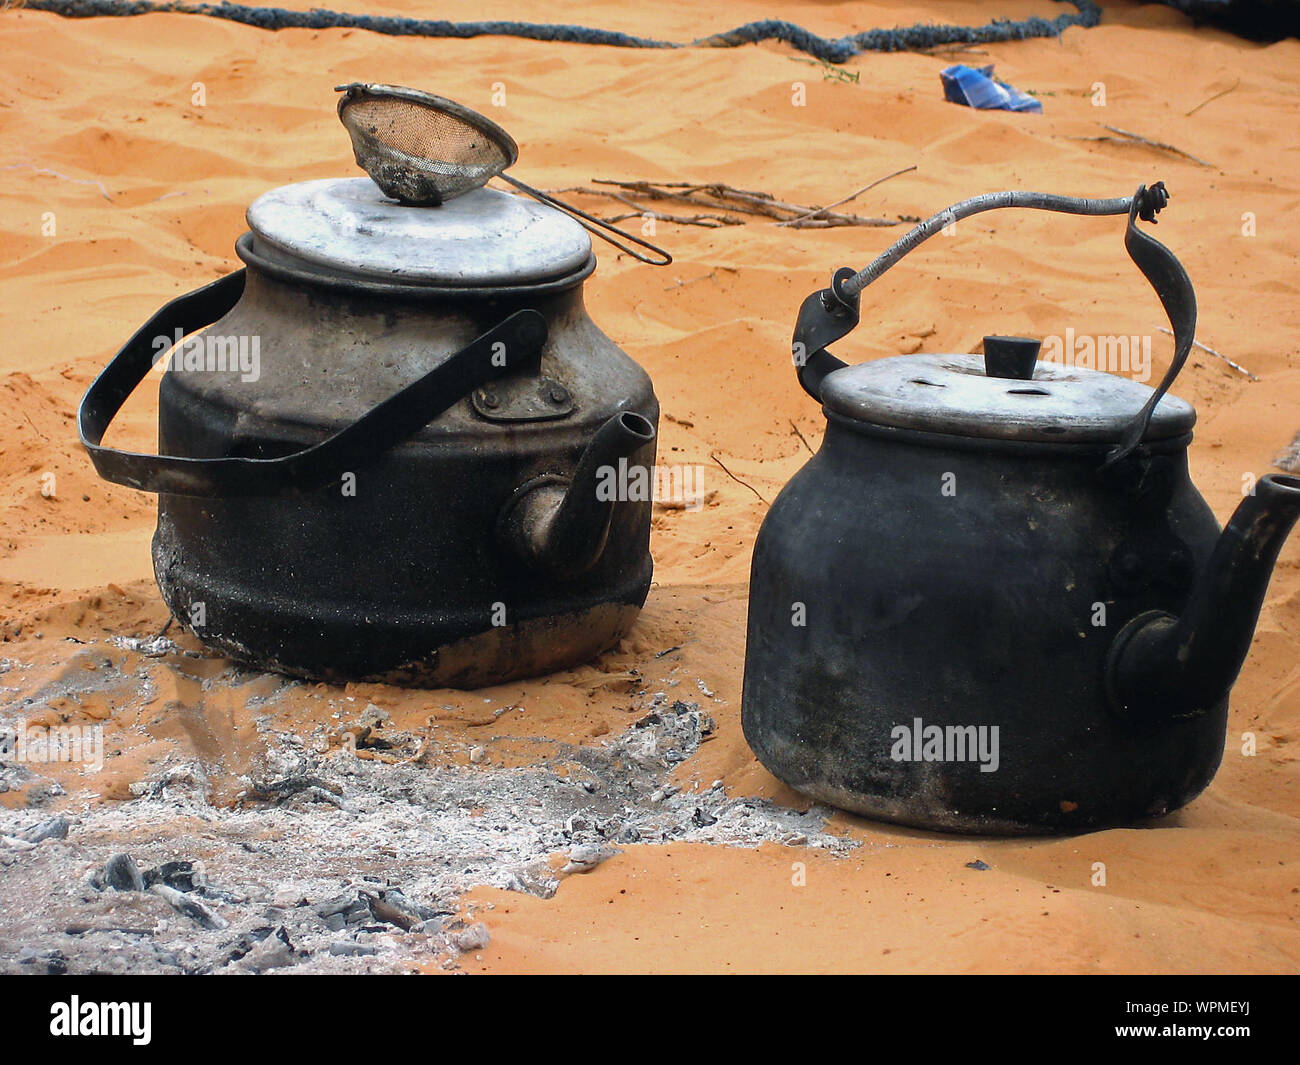 High Angle View Of Burnt Kettles On Sand In Desert Stock Photo - Alamy